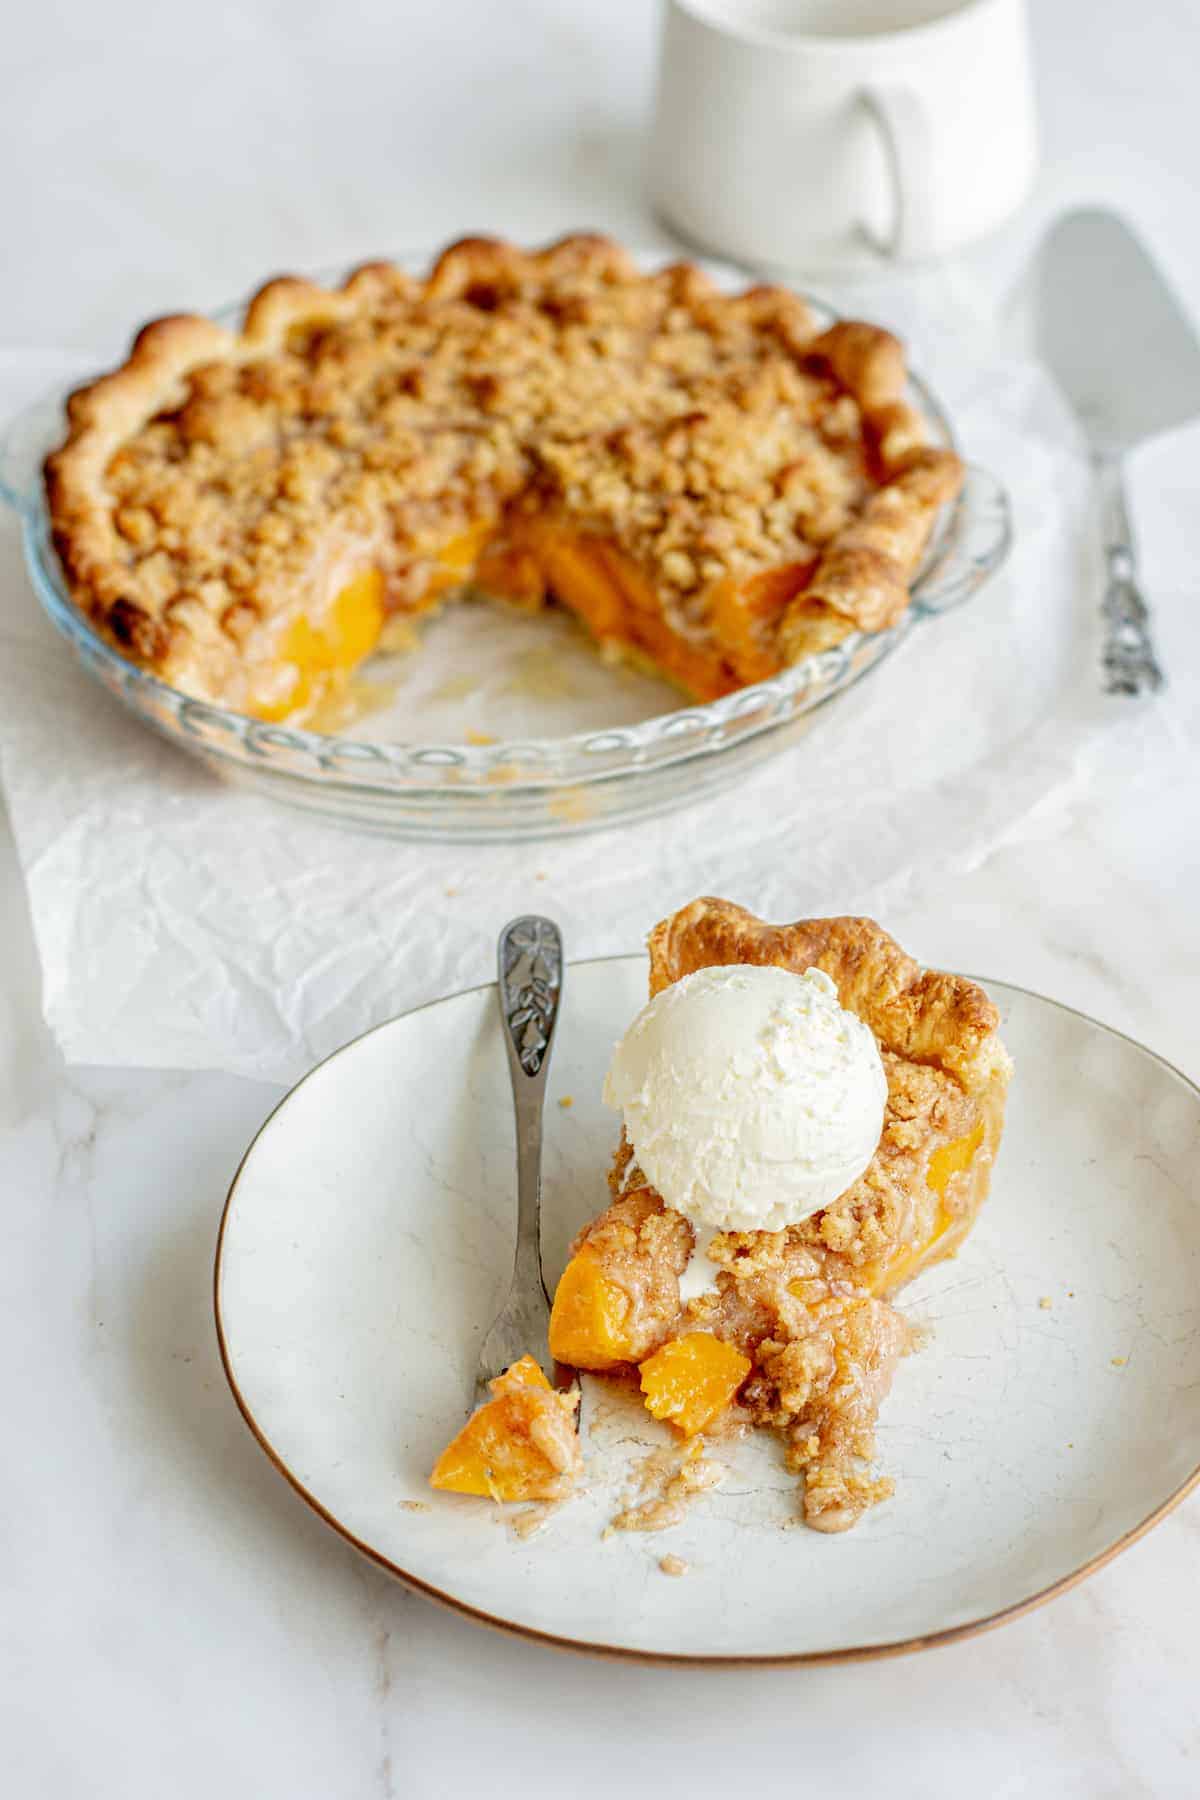 Butter streusel topped pie.